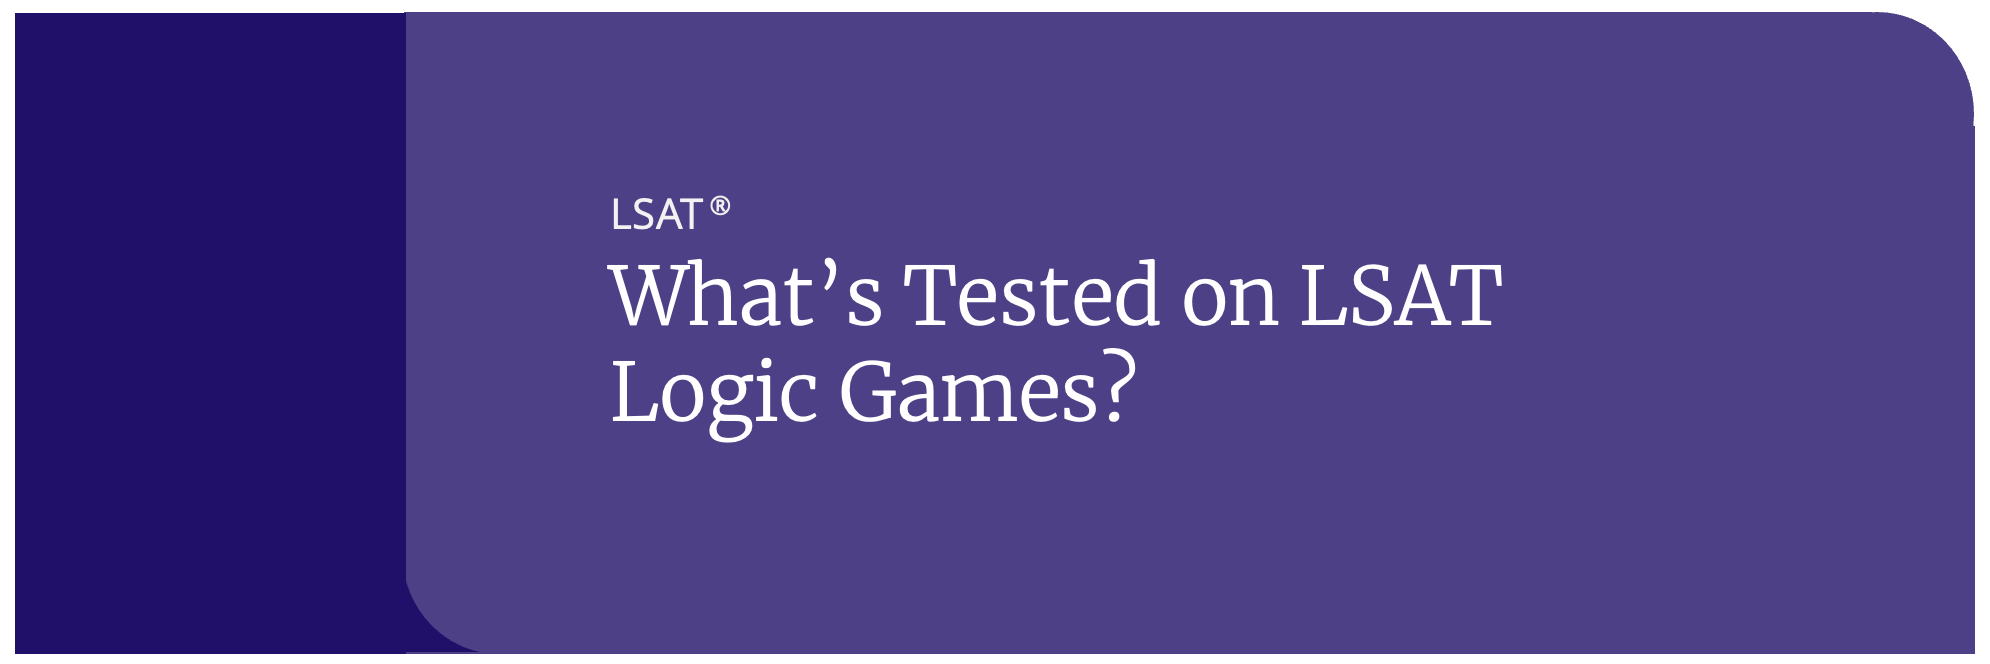 whats tested lsat logic games